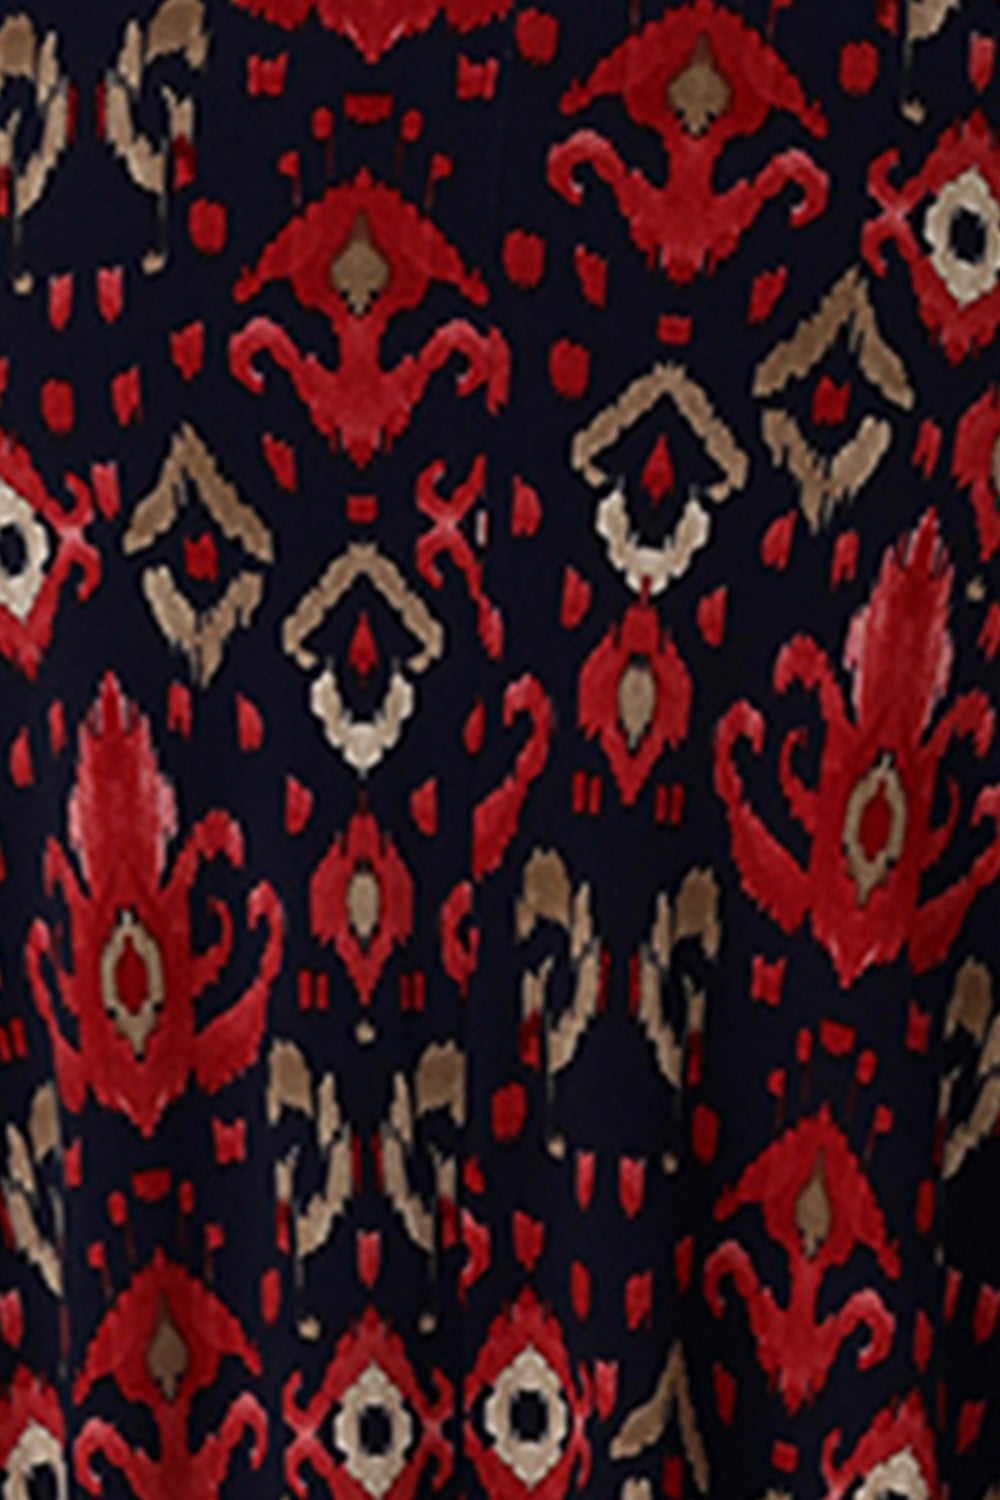 Swatch of Australian and New Zealand women's clothing label, Leina & Fleur's 'Ikat' print on stretch jersey fabric used to make a range of women's work dresses and tops.